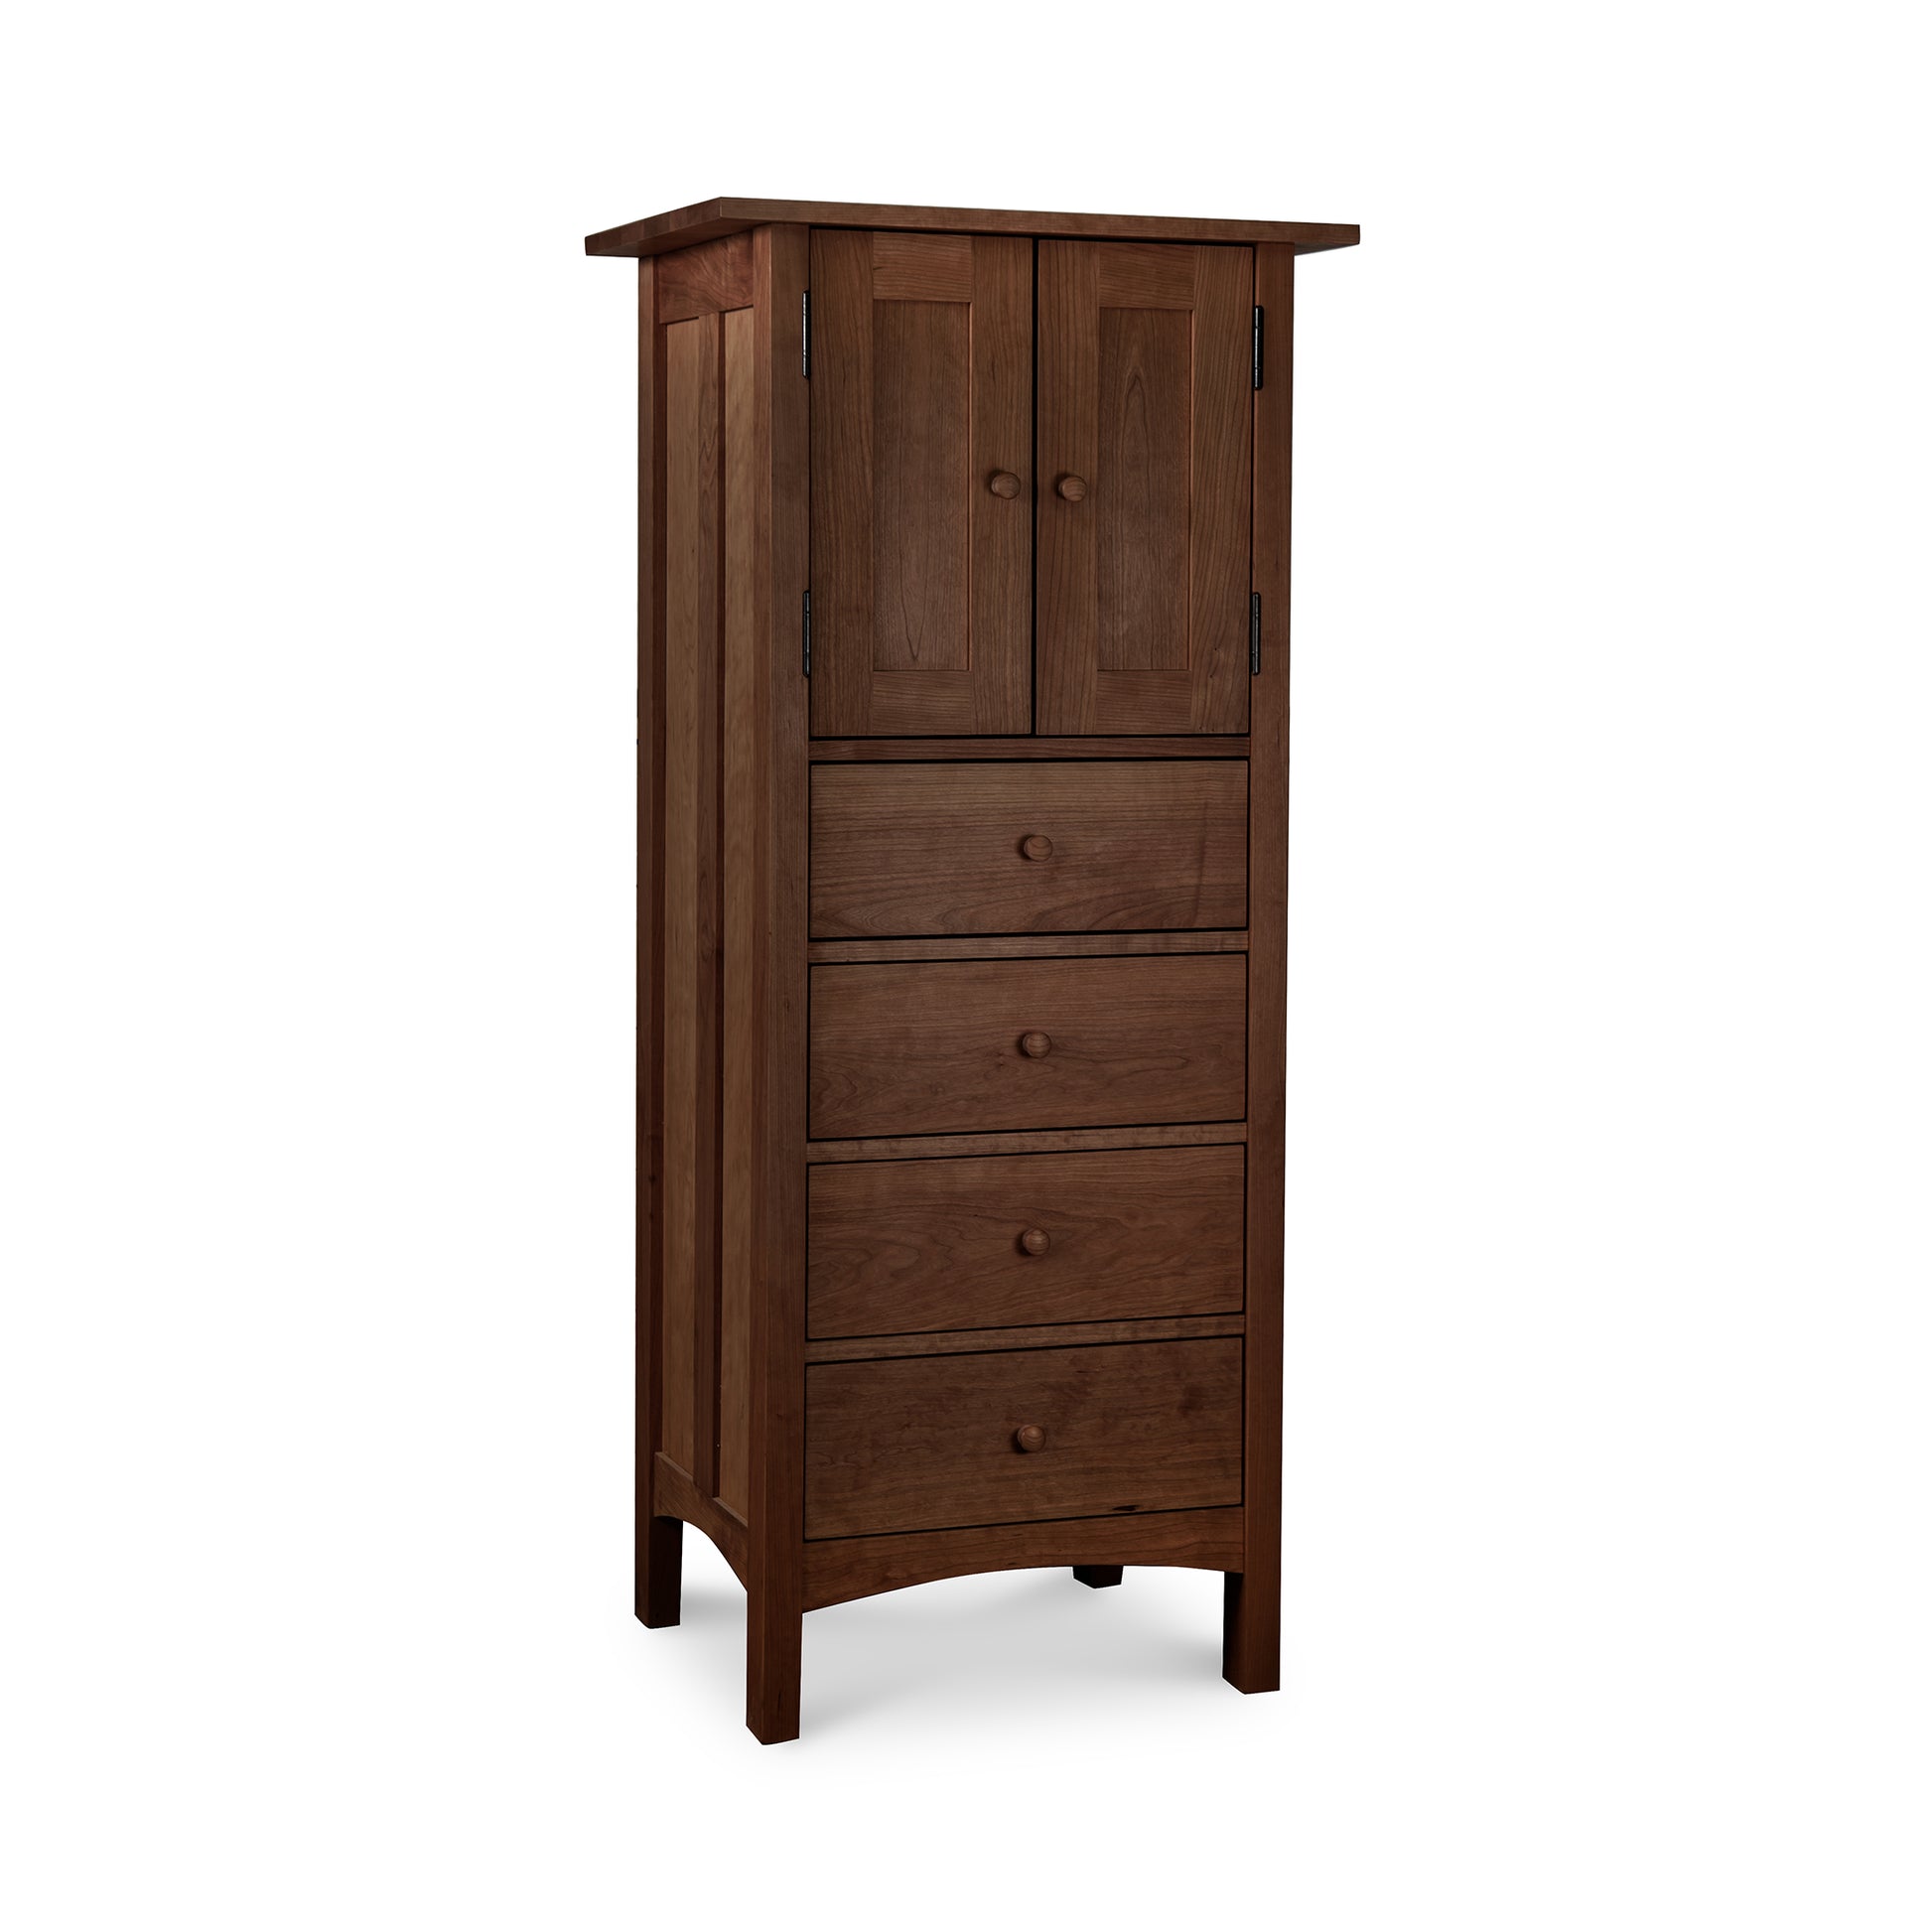 A Burlington Shaker Tall Storage Chest with drawers, designed in Shaker Style for a tall storage chest.